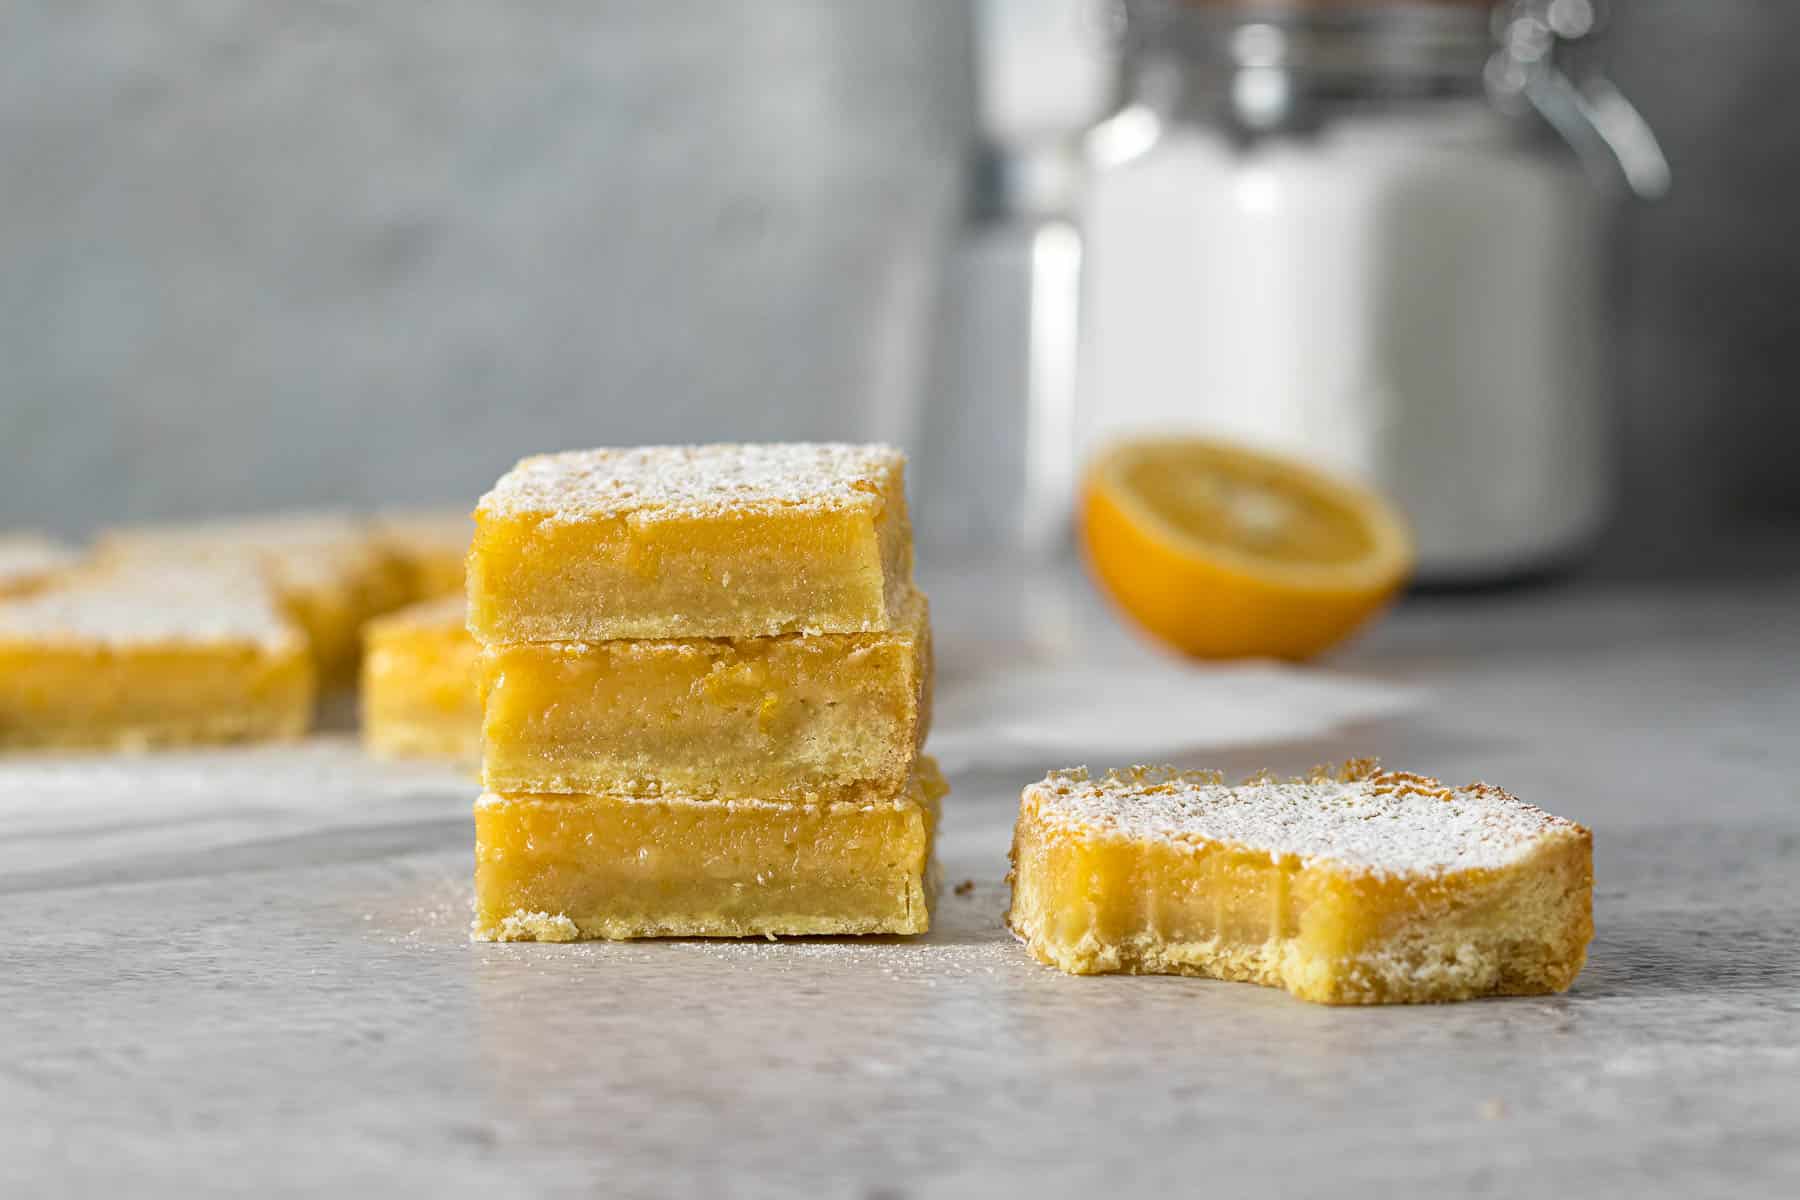 Stack of lemon slices dusted with icing sugar.